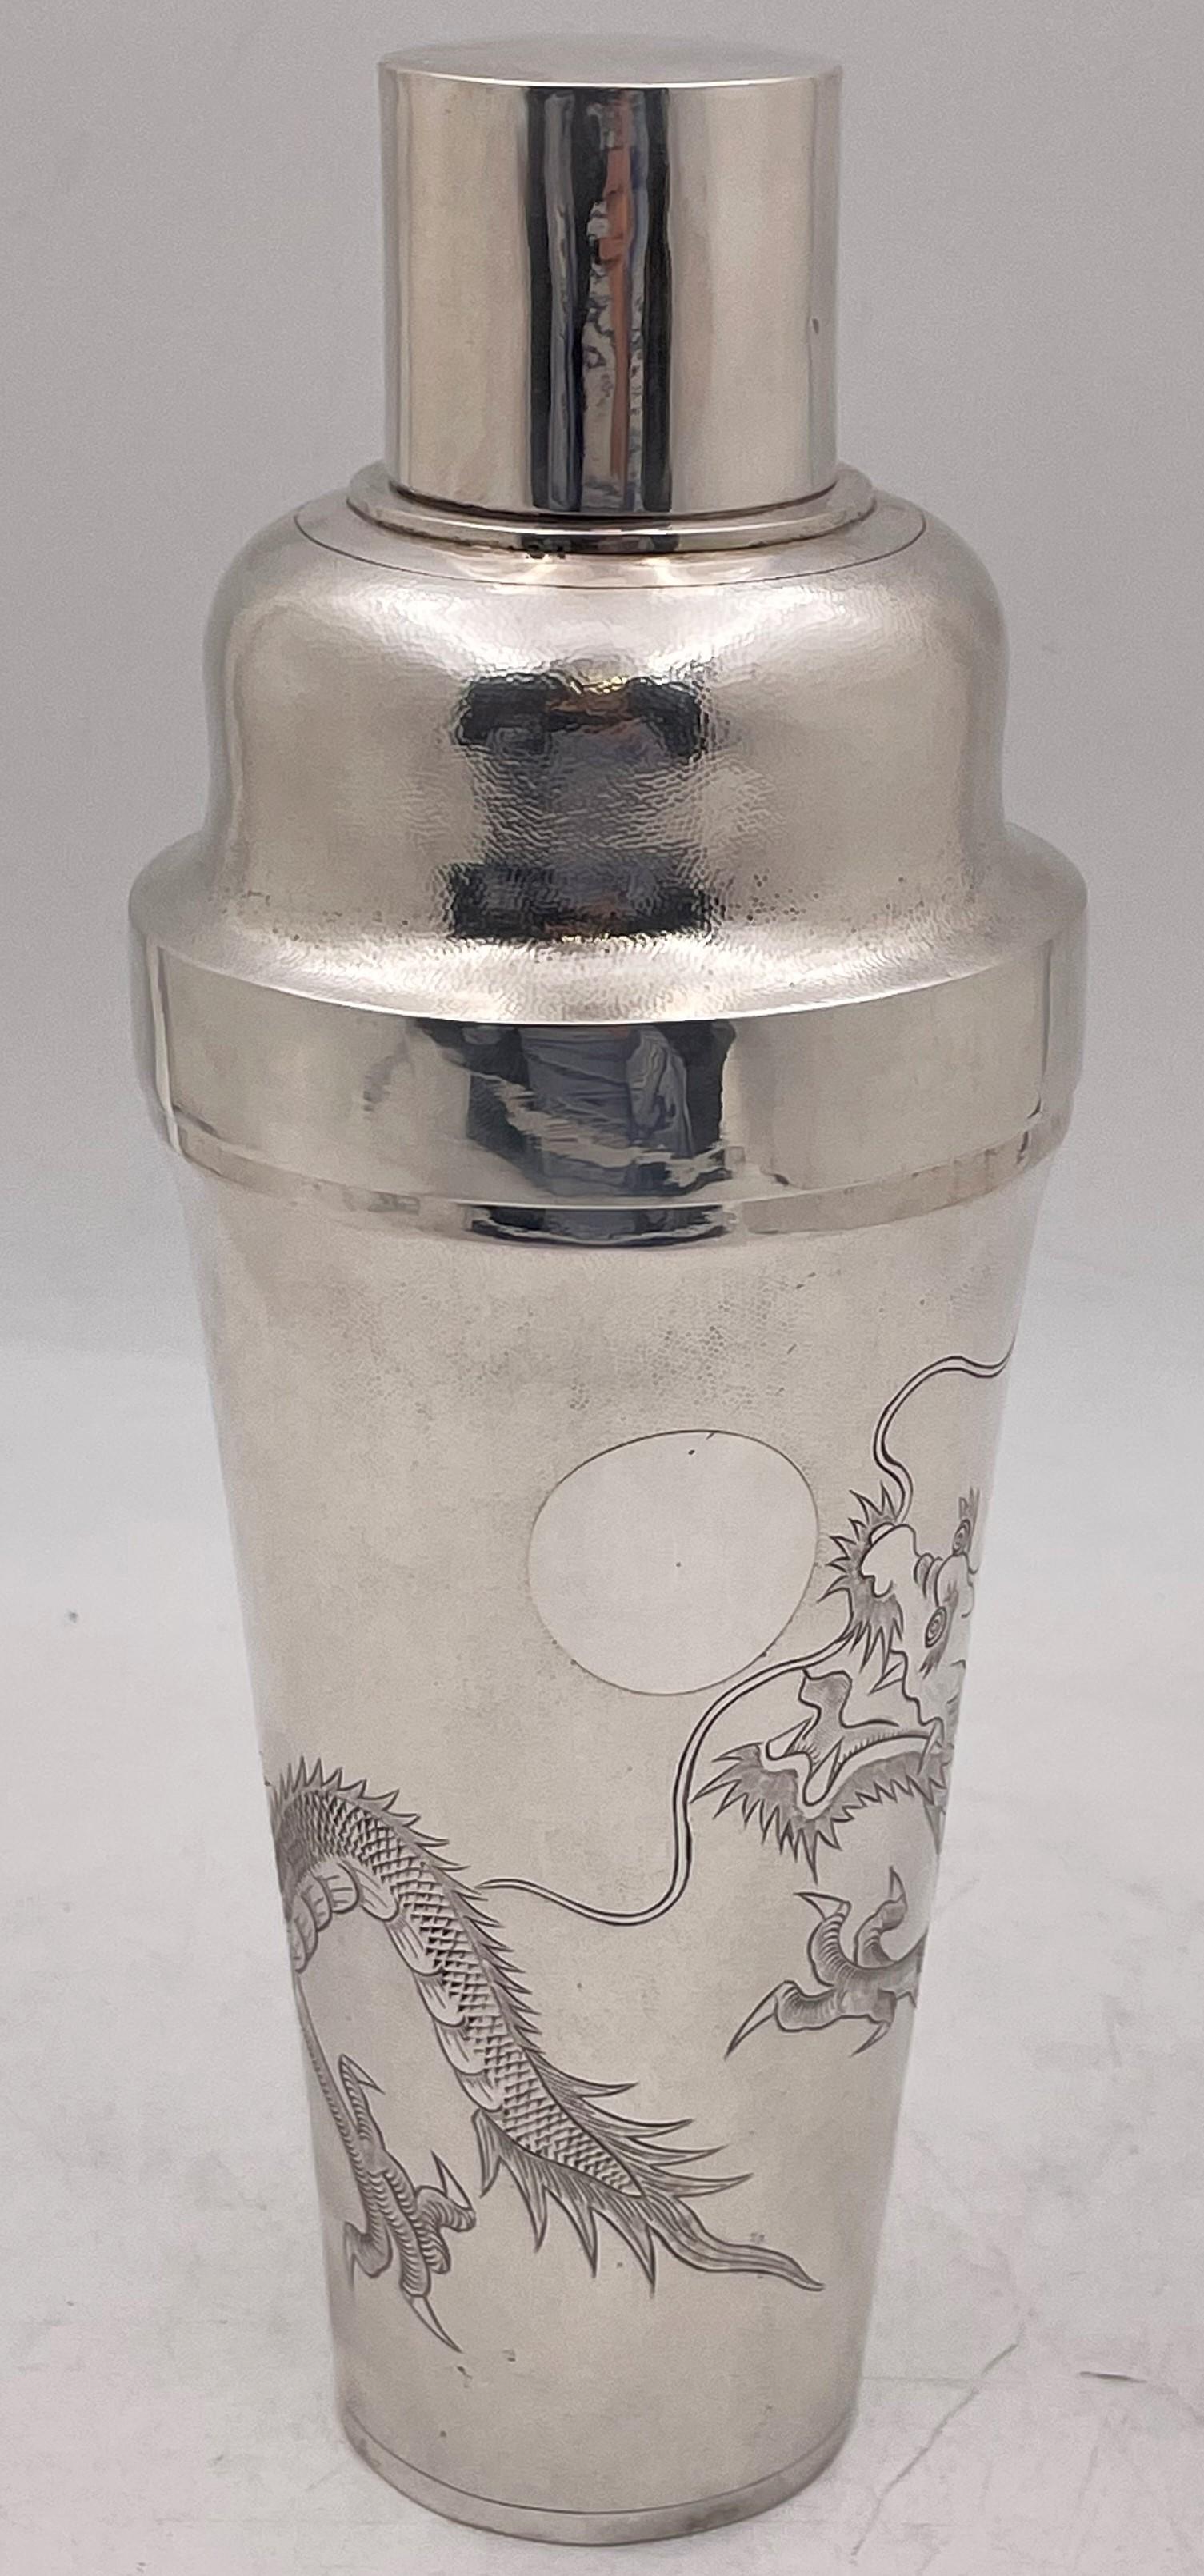 Chinese export, 0.950 silver (higher purity than sterling) cocktail shaker by C. J. & Co from the early 20th century, with engraved dragon motifs on a textured background. It measures 10 1/2'' in height by 4 1/3'' in diameter, weighs 16.8 troy